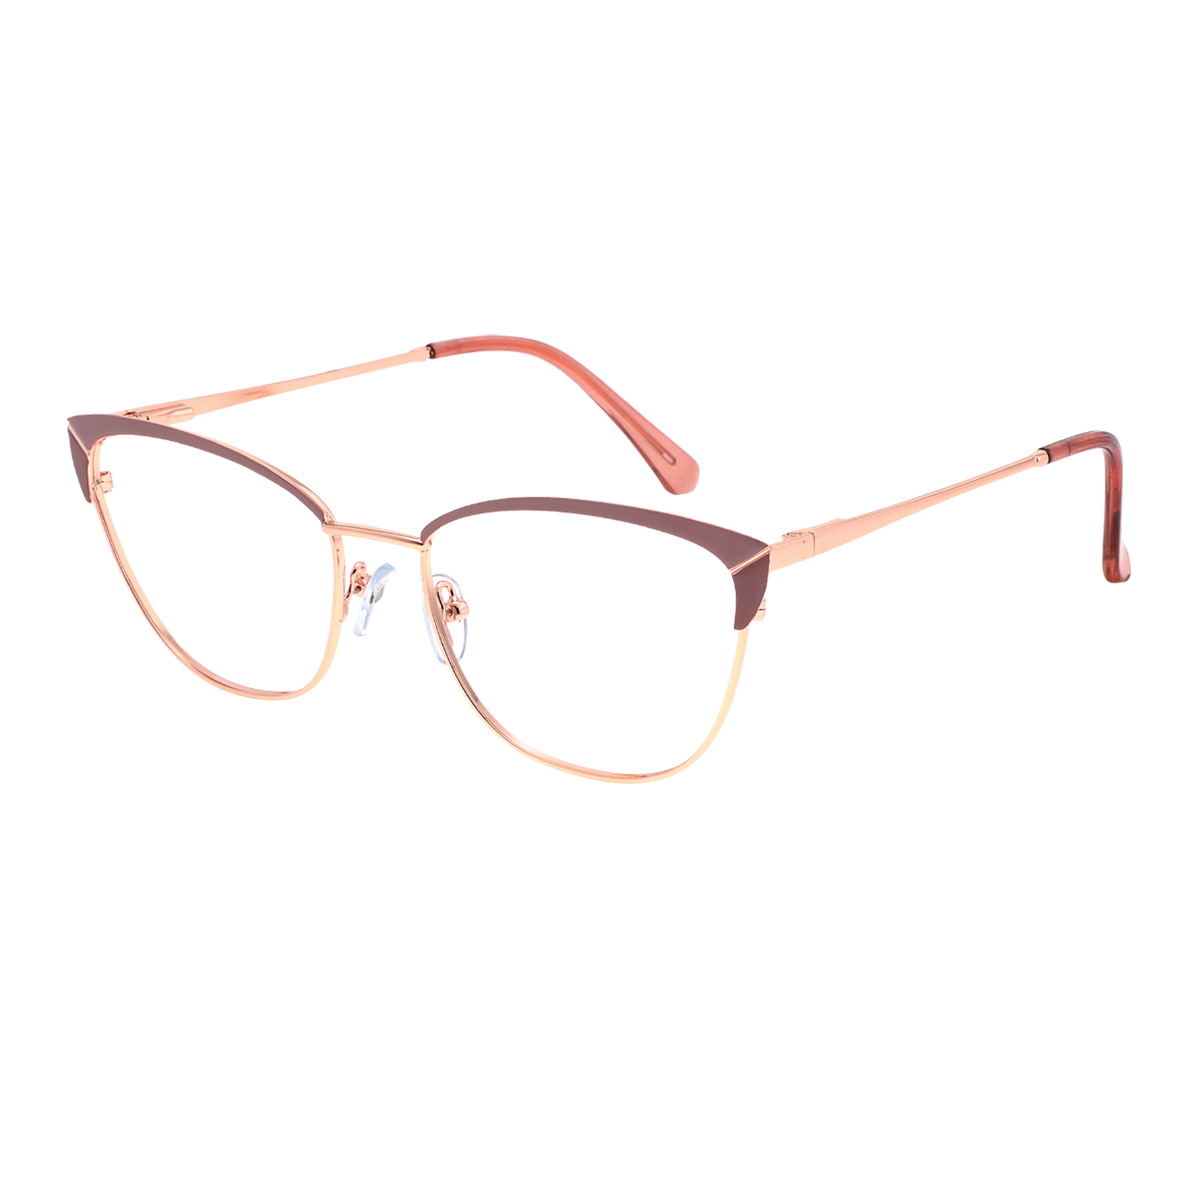 Carolyn - Browline Wine-gold Reading Glasses for Women